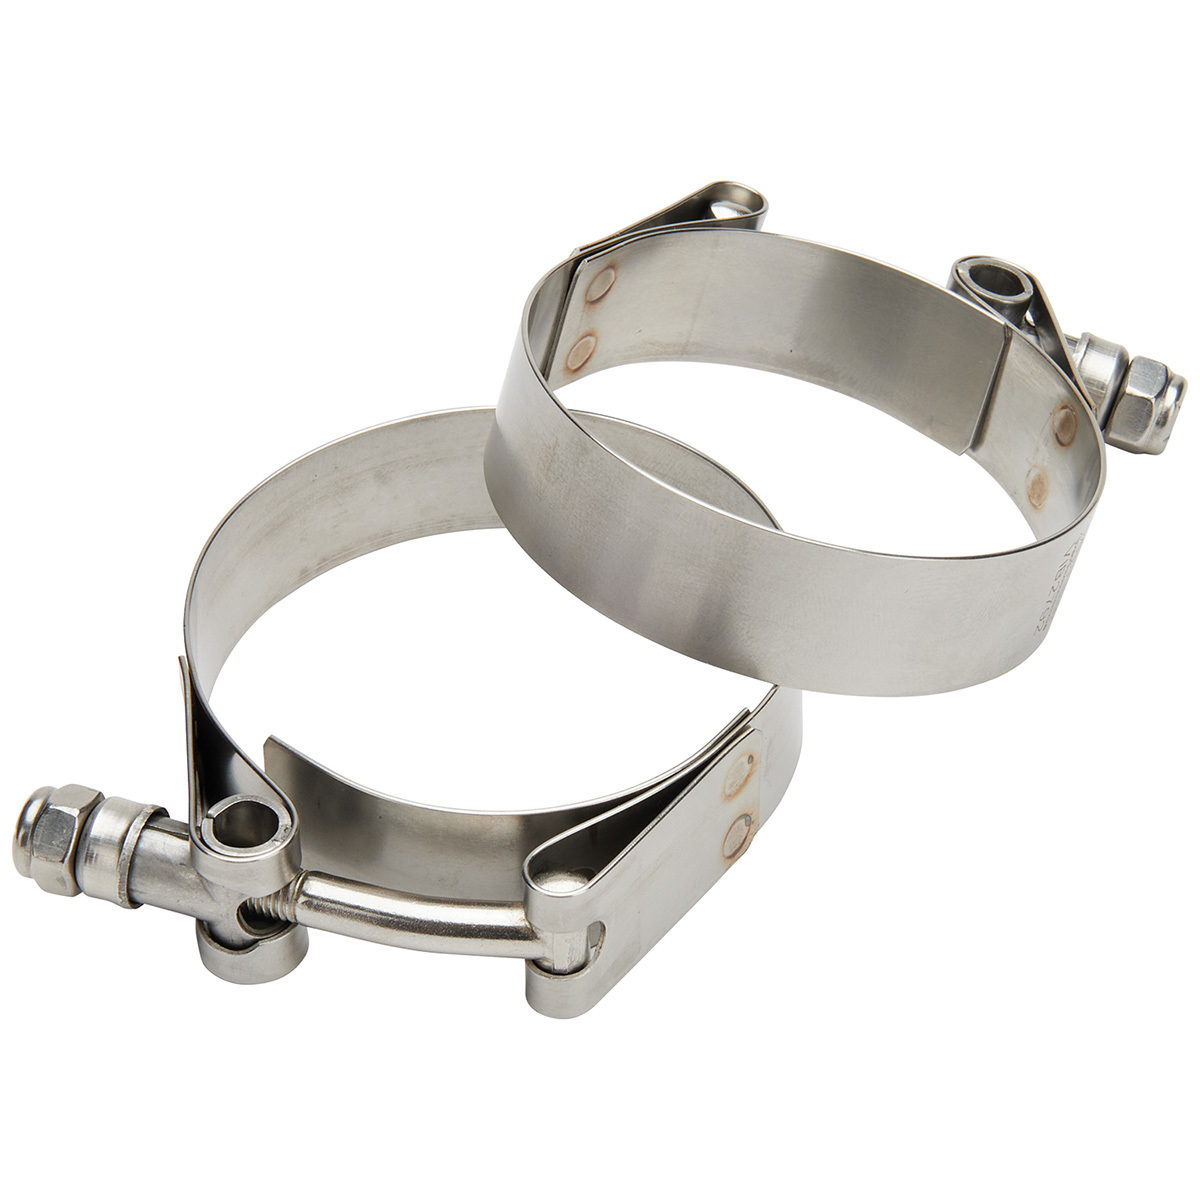 Allstar Performance 18350 Hose Clamp, T-Bolt, 3/4 in Wide, 2-3/8 to 2-3/4 in Range, Stainless, Natural, Pair